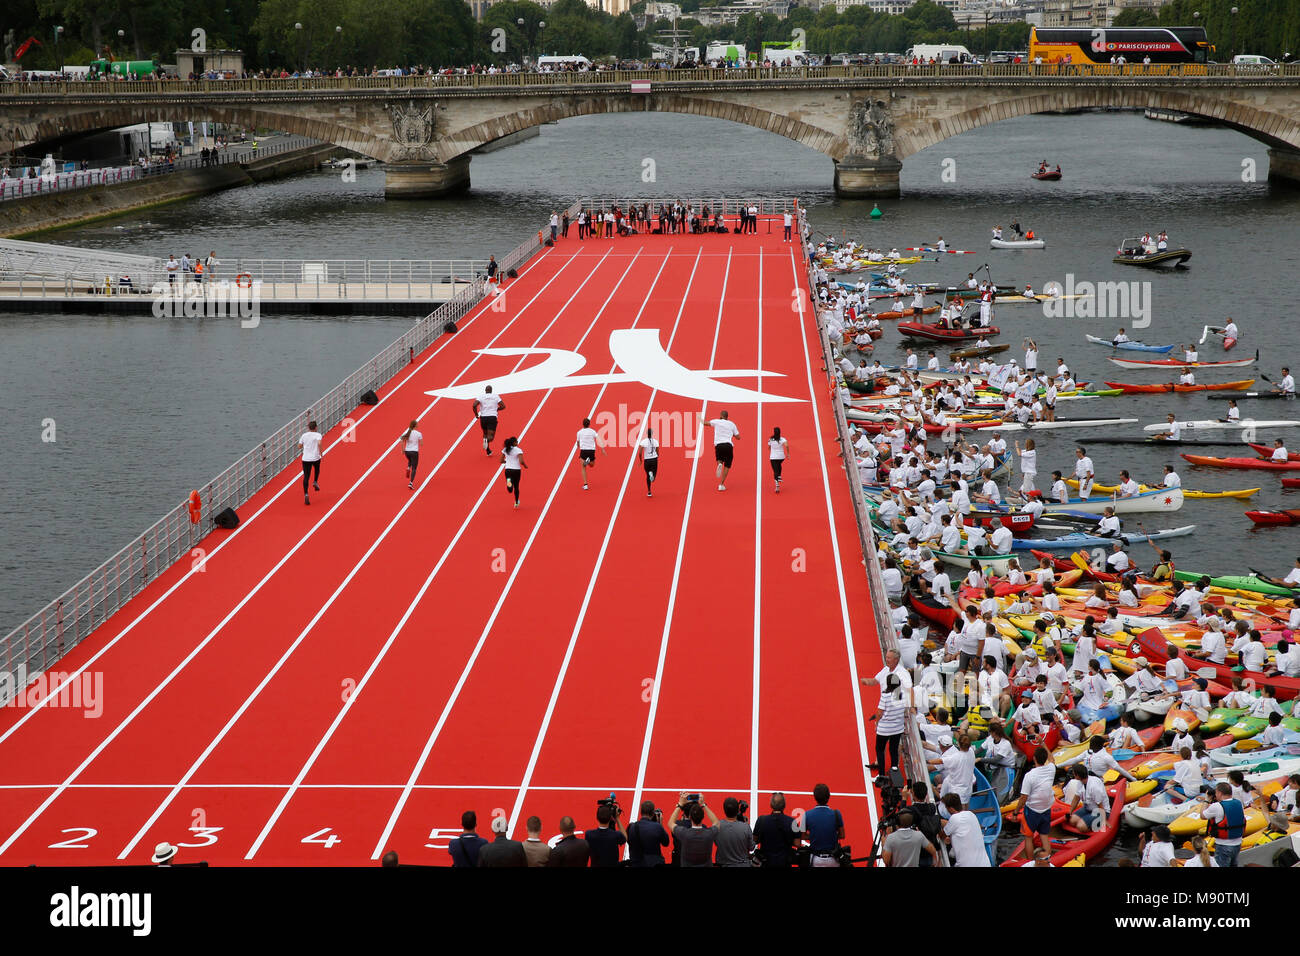 Racing track on the Seine river in Paris, France. Stock Photo